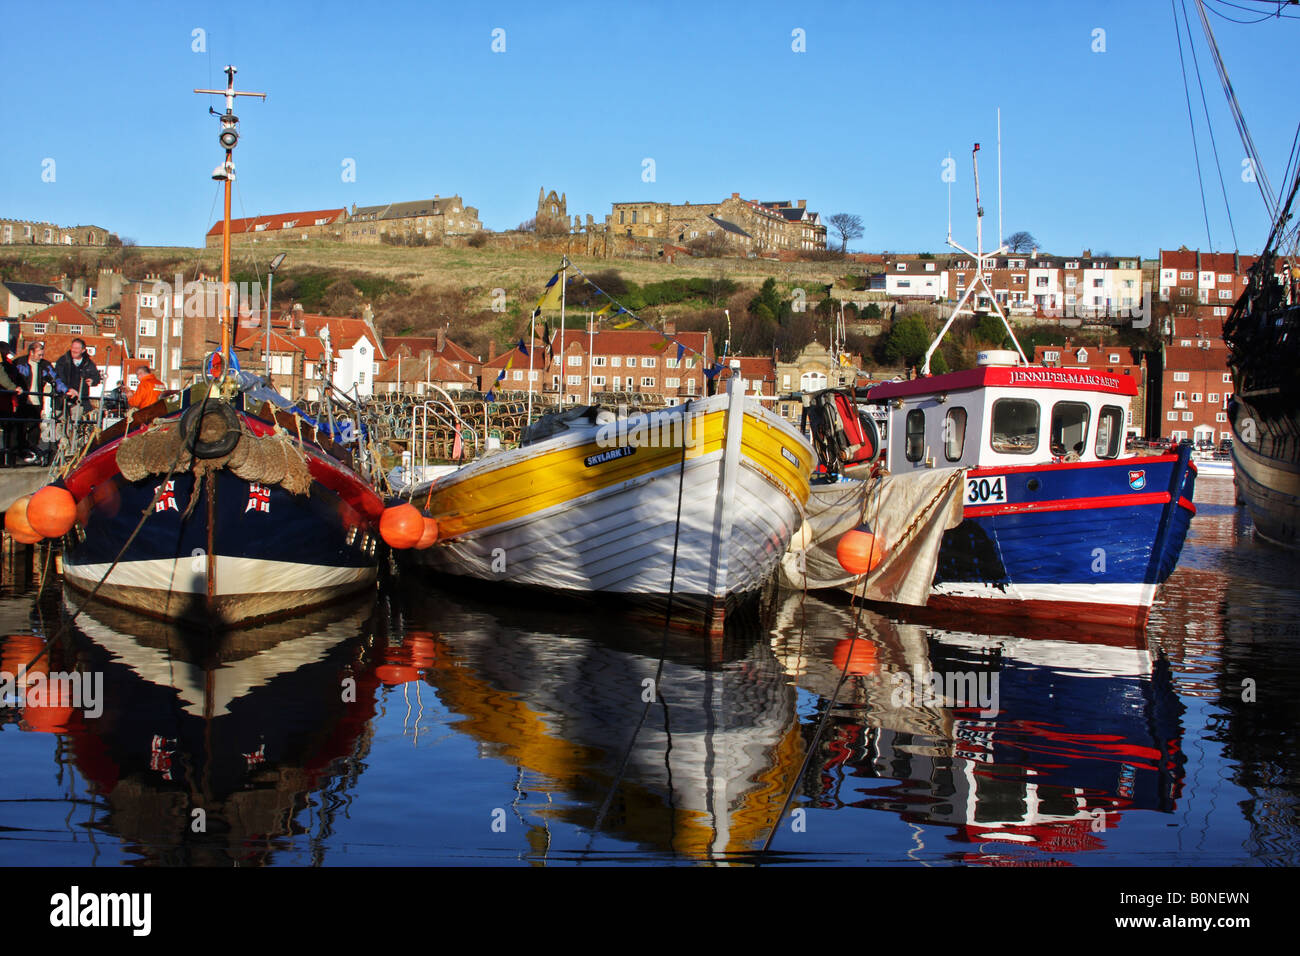 Working fishing boats in Whitby Harbour, with abbey behind and against a blue sky. Stock Photo